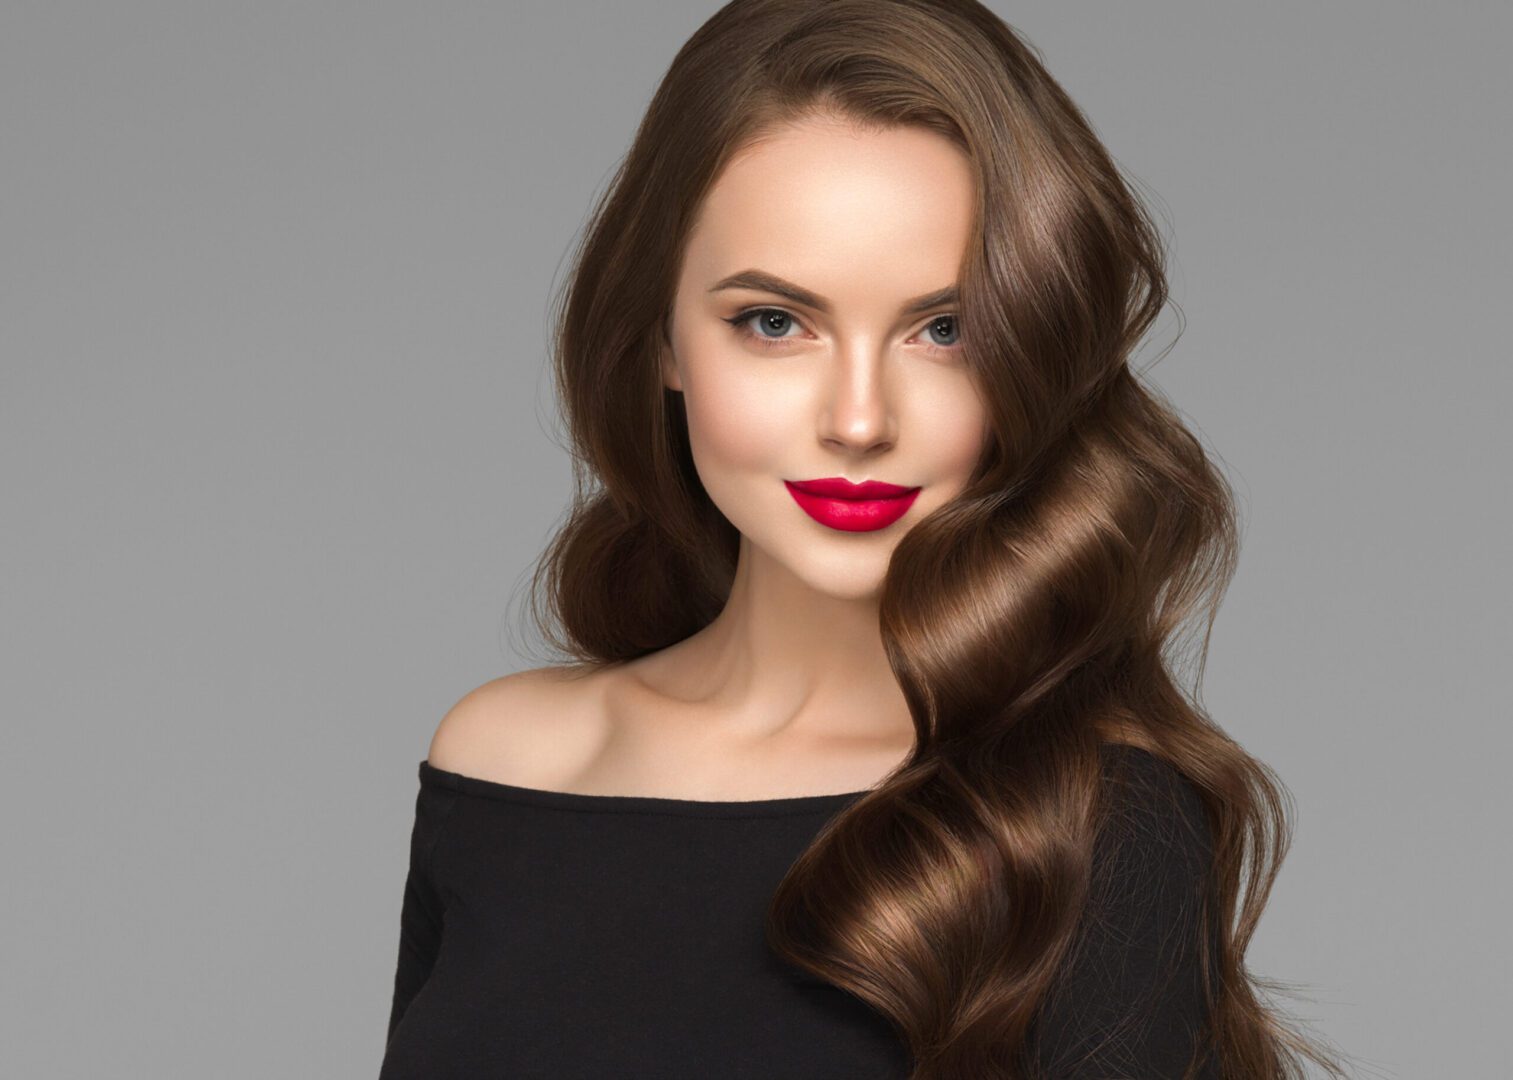 A person with long wavy brown hair and a charming face wearing red lipstick